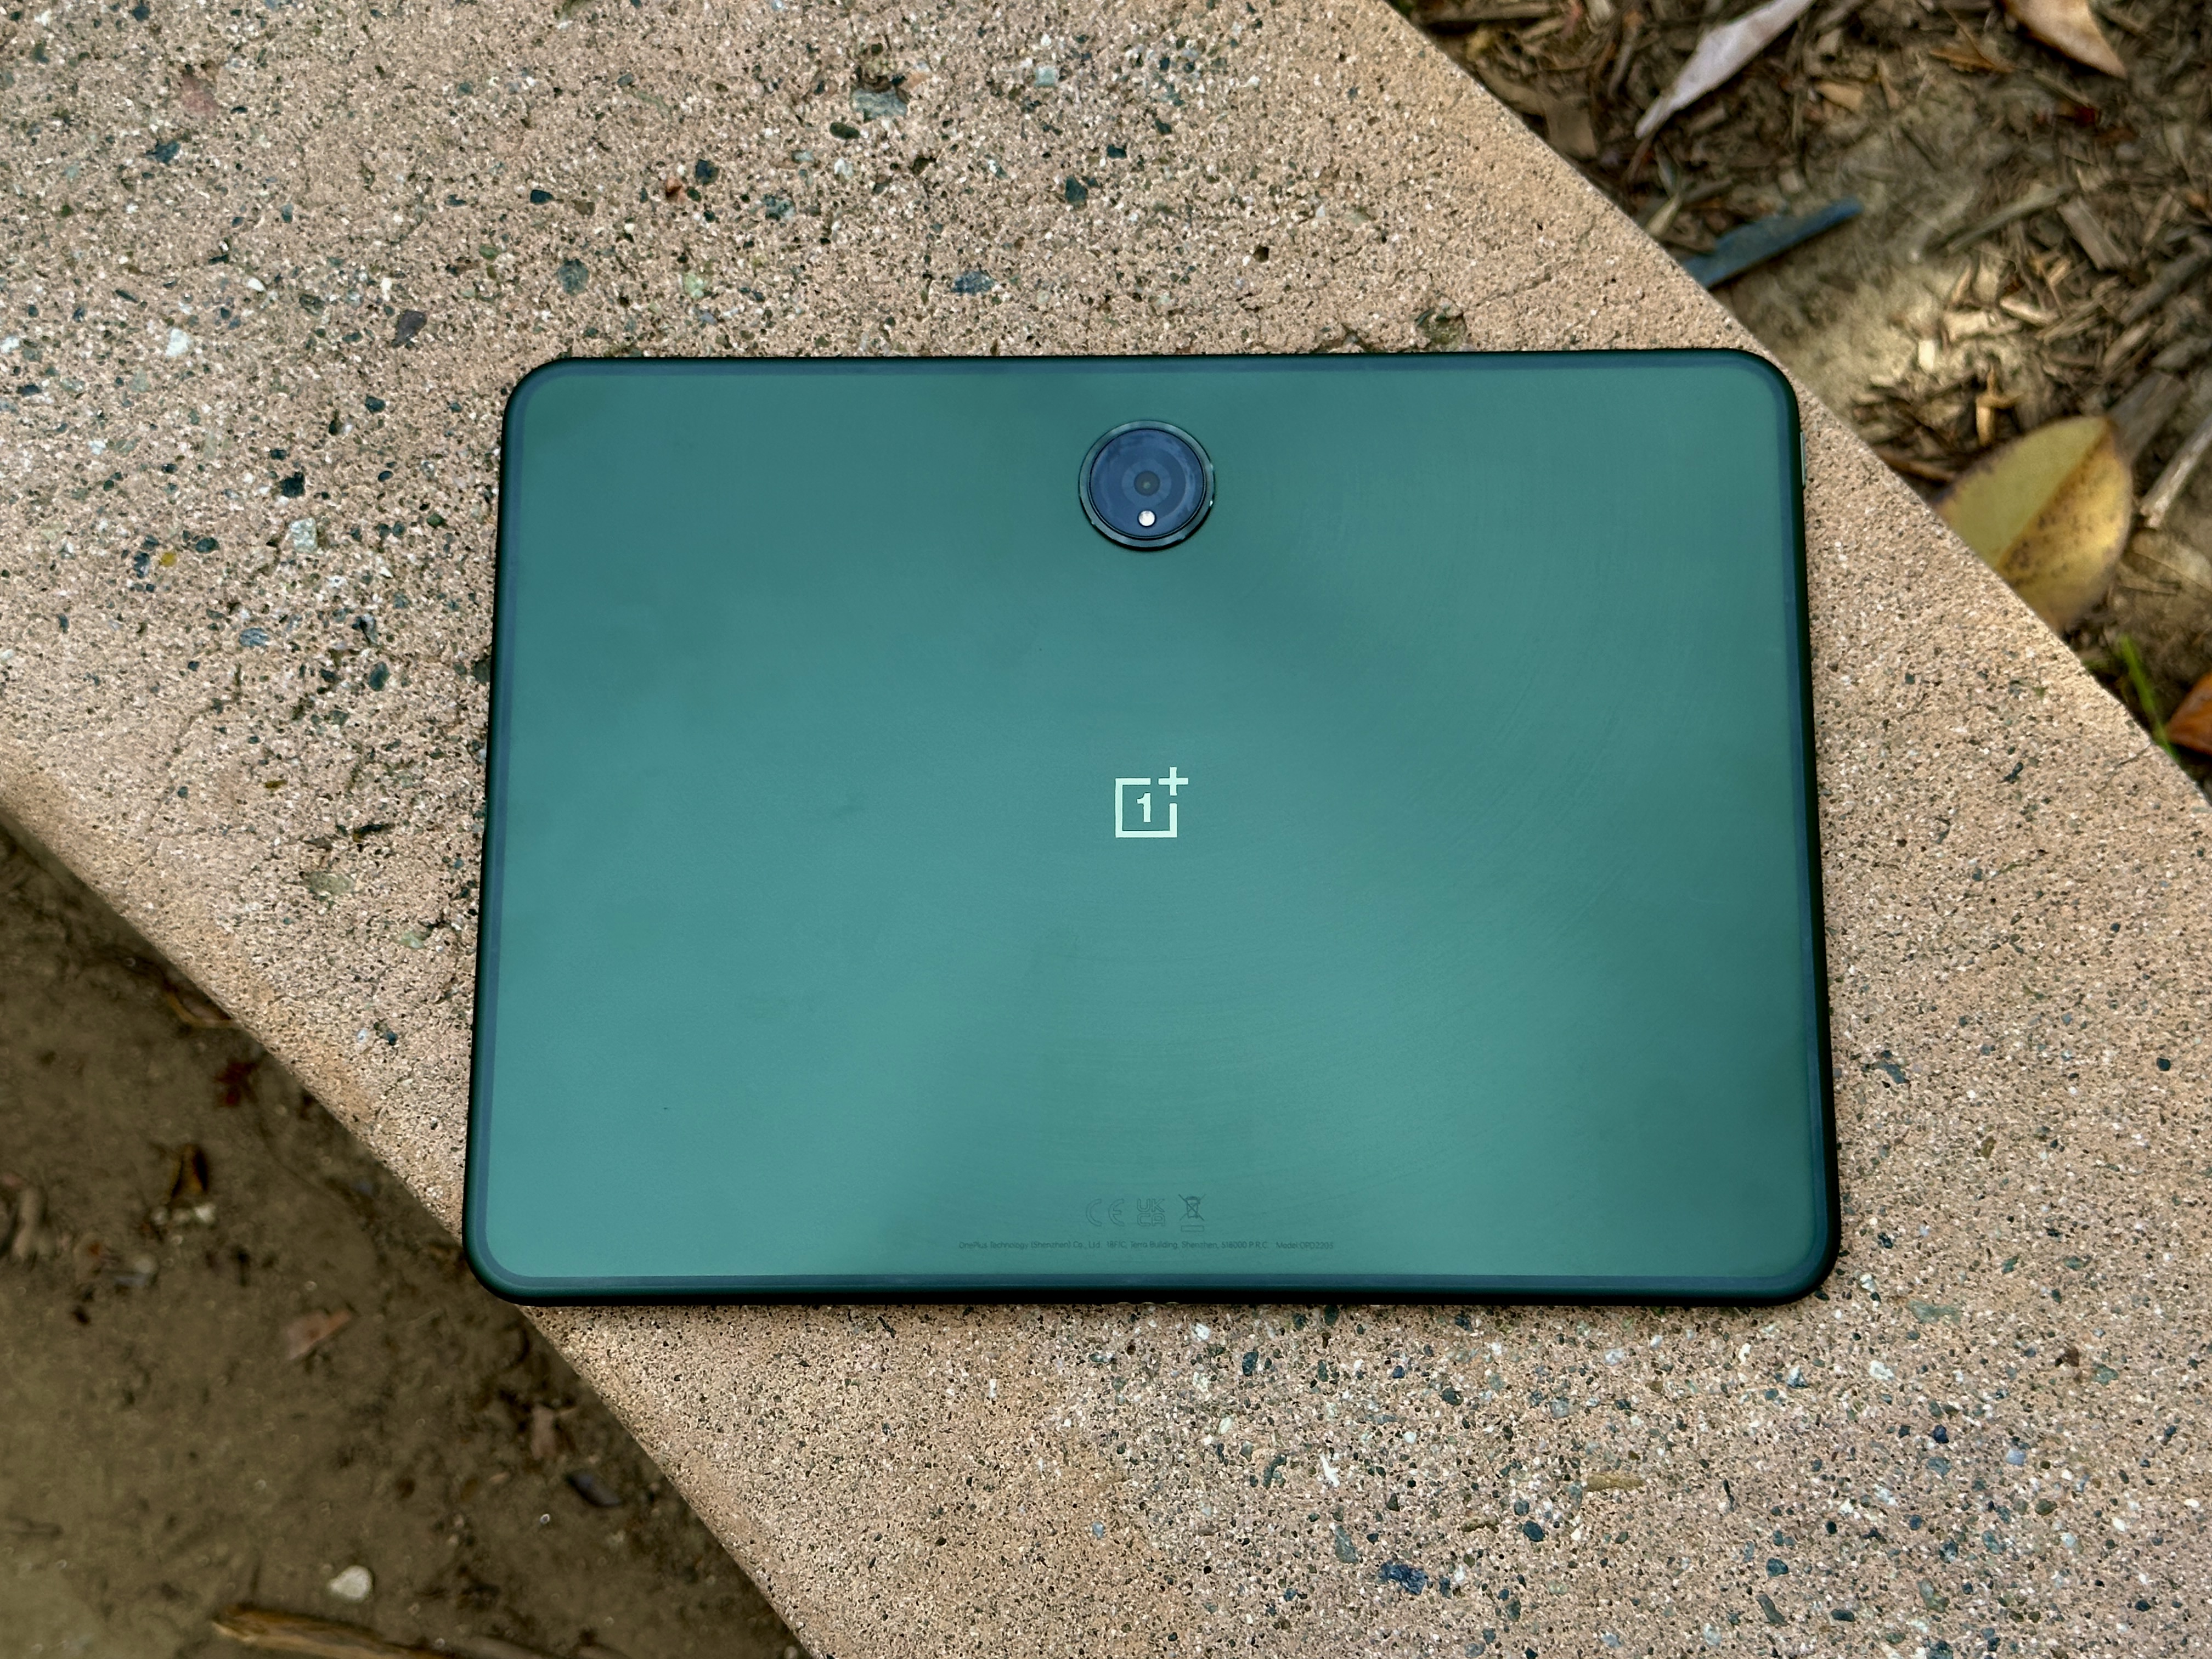 OnePlus Pad Review: Just another Android tablet